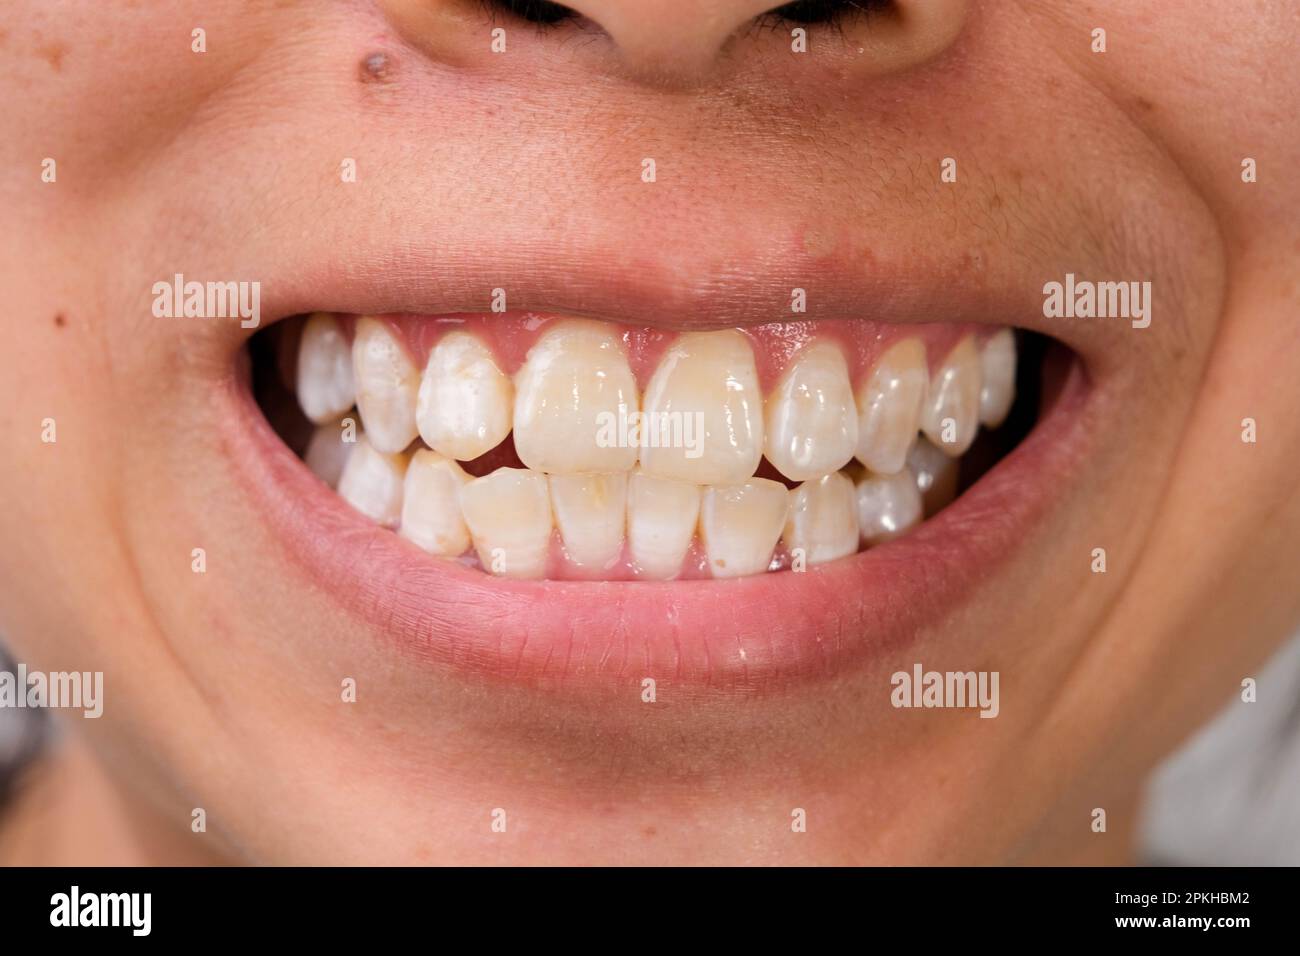 Close-up of a smiling woman's teeth revealing white spots and plaque on the tooth surface. Oral care and Dental concept. Stock Photo